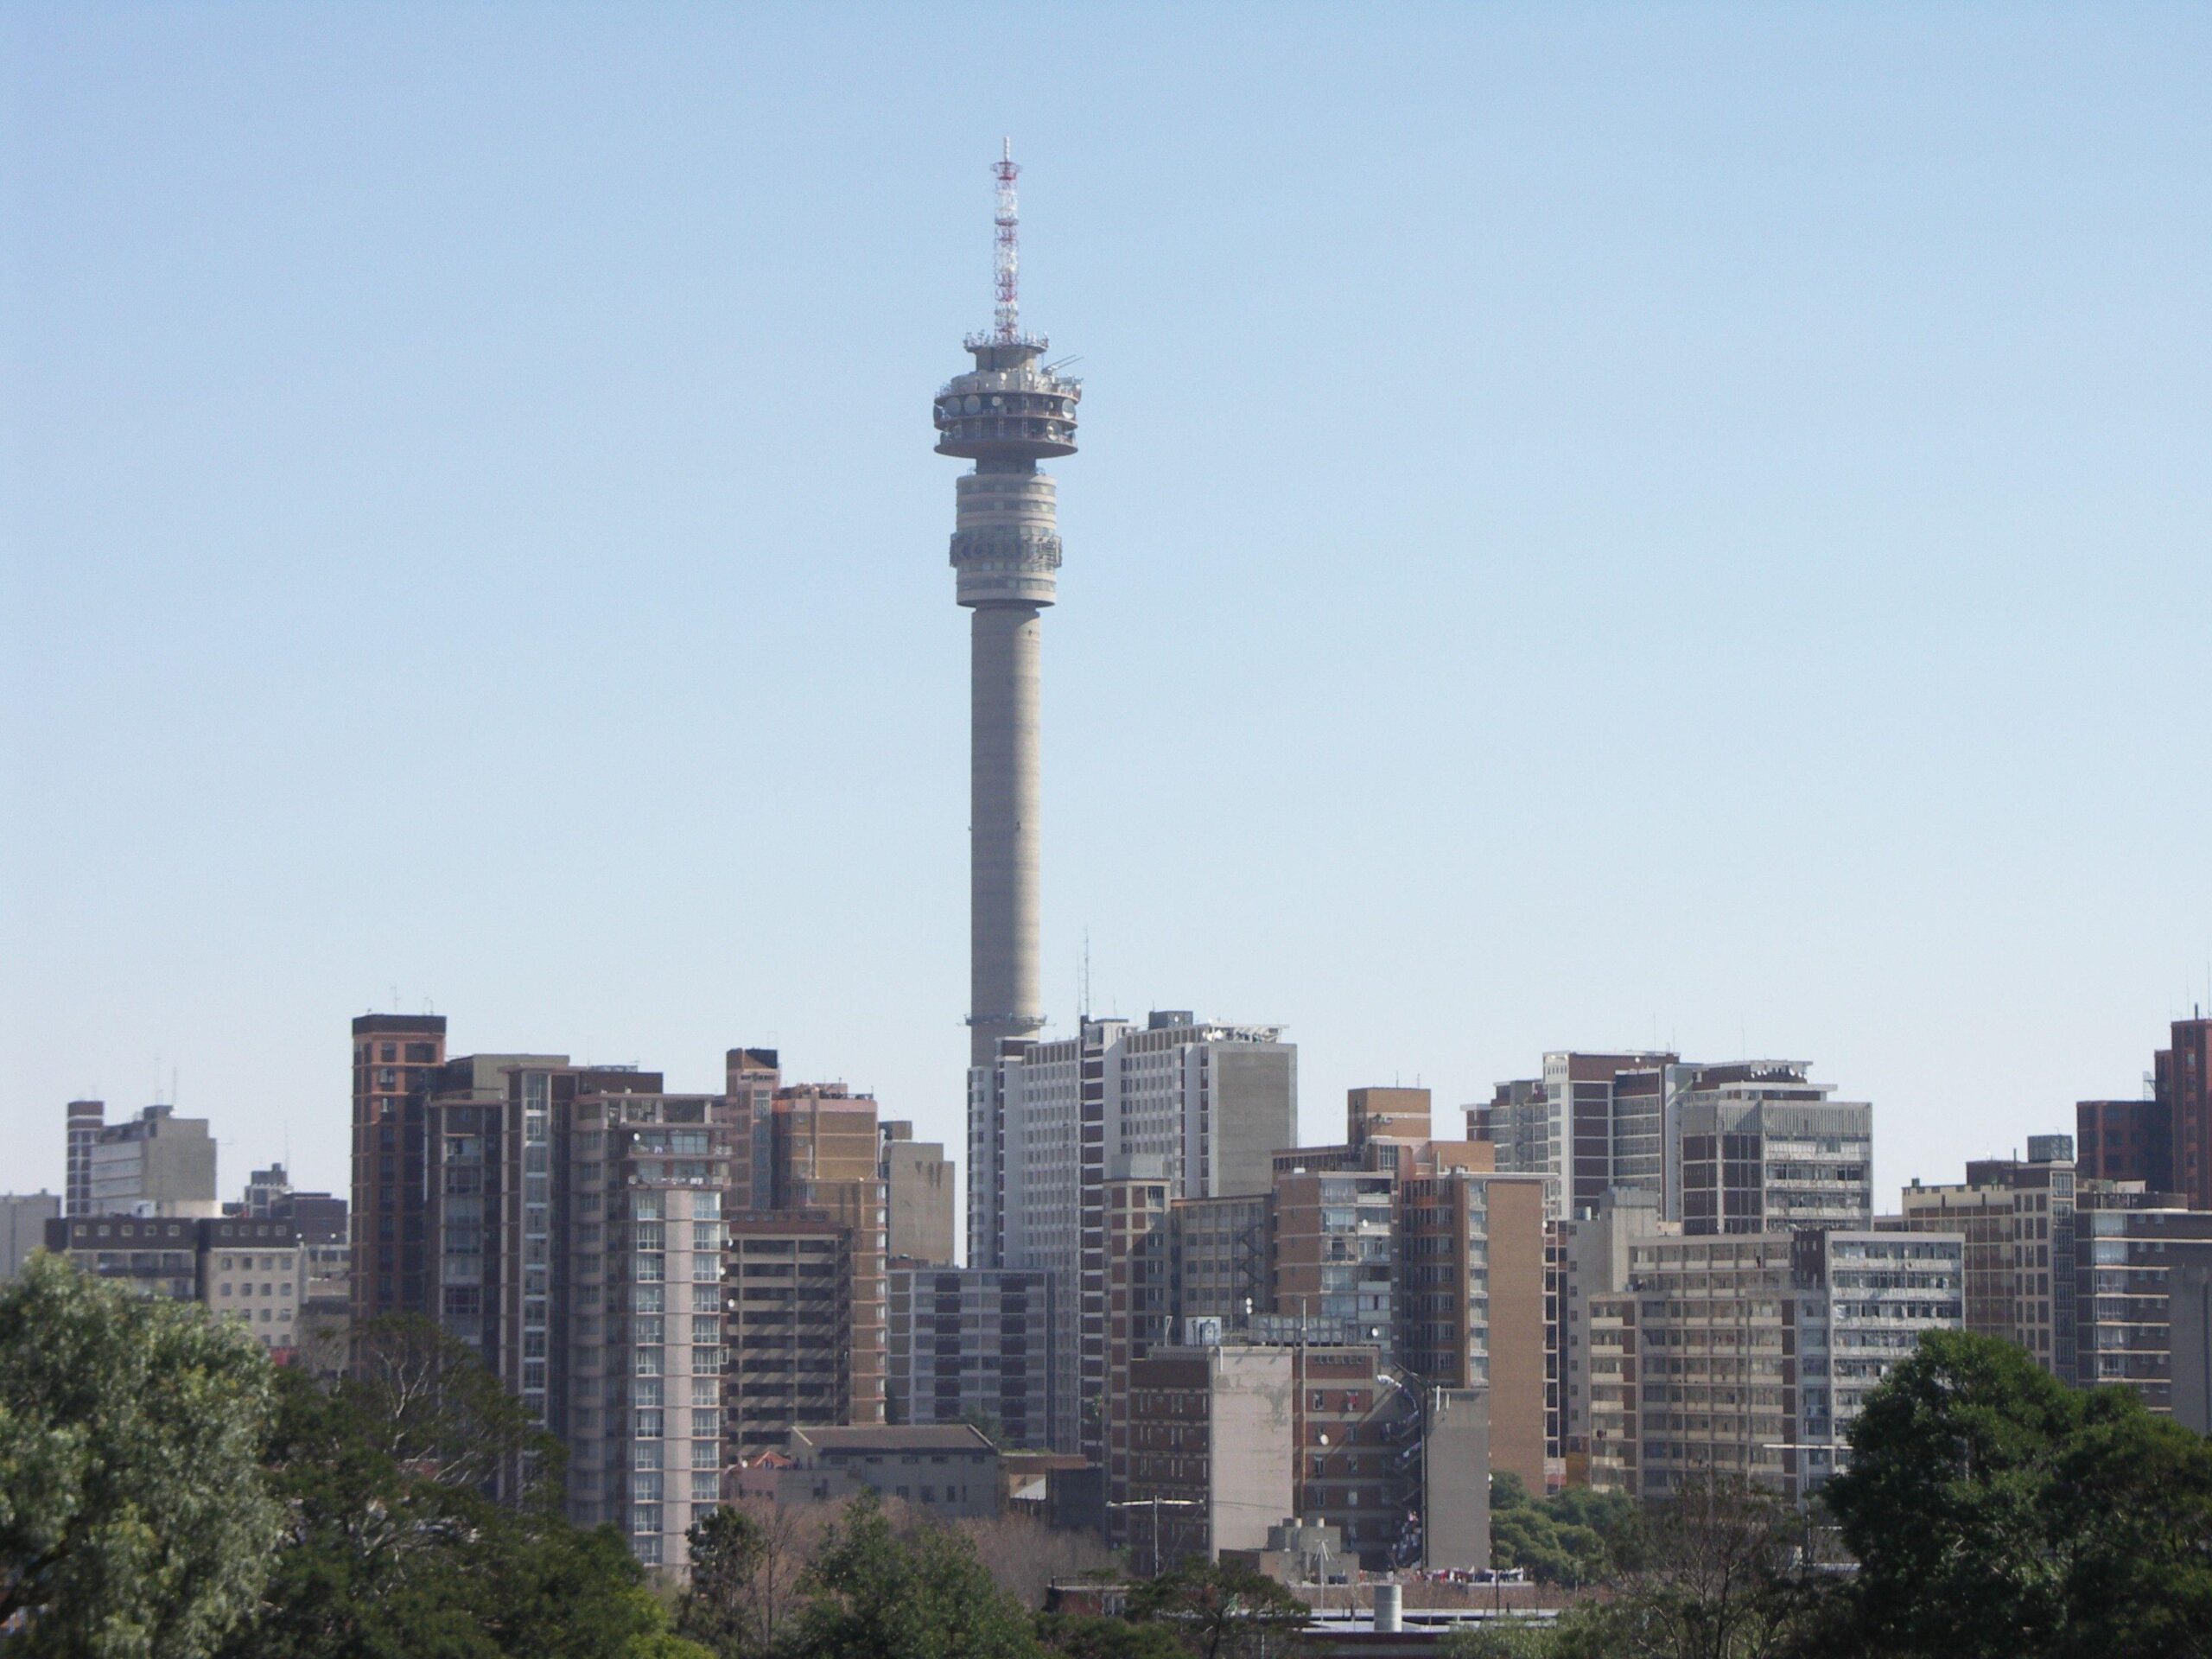 Skyscrapers Johannesburg South Africa Skyline City Architecture